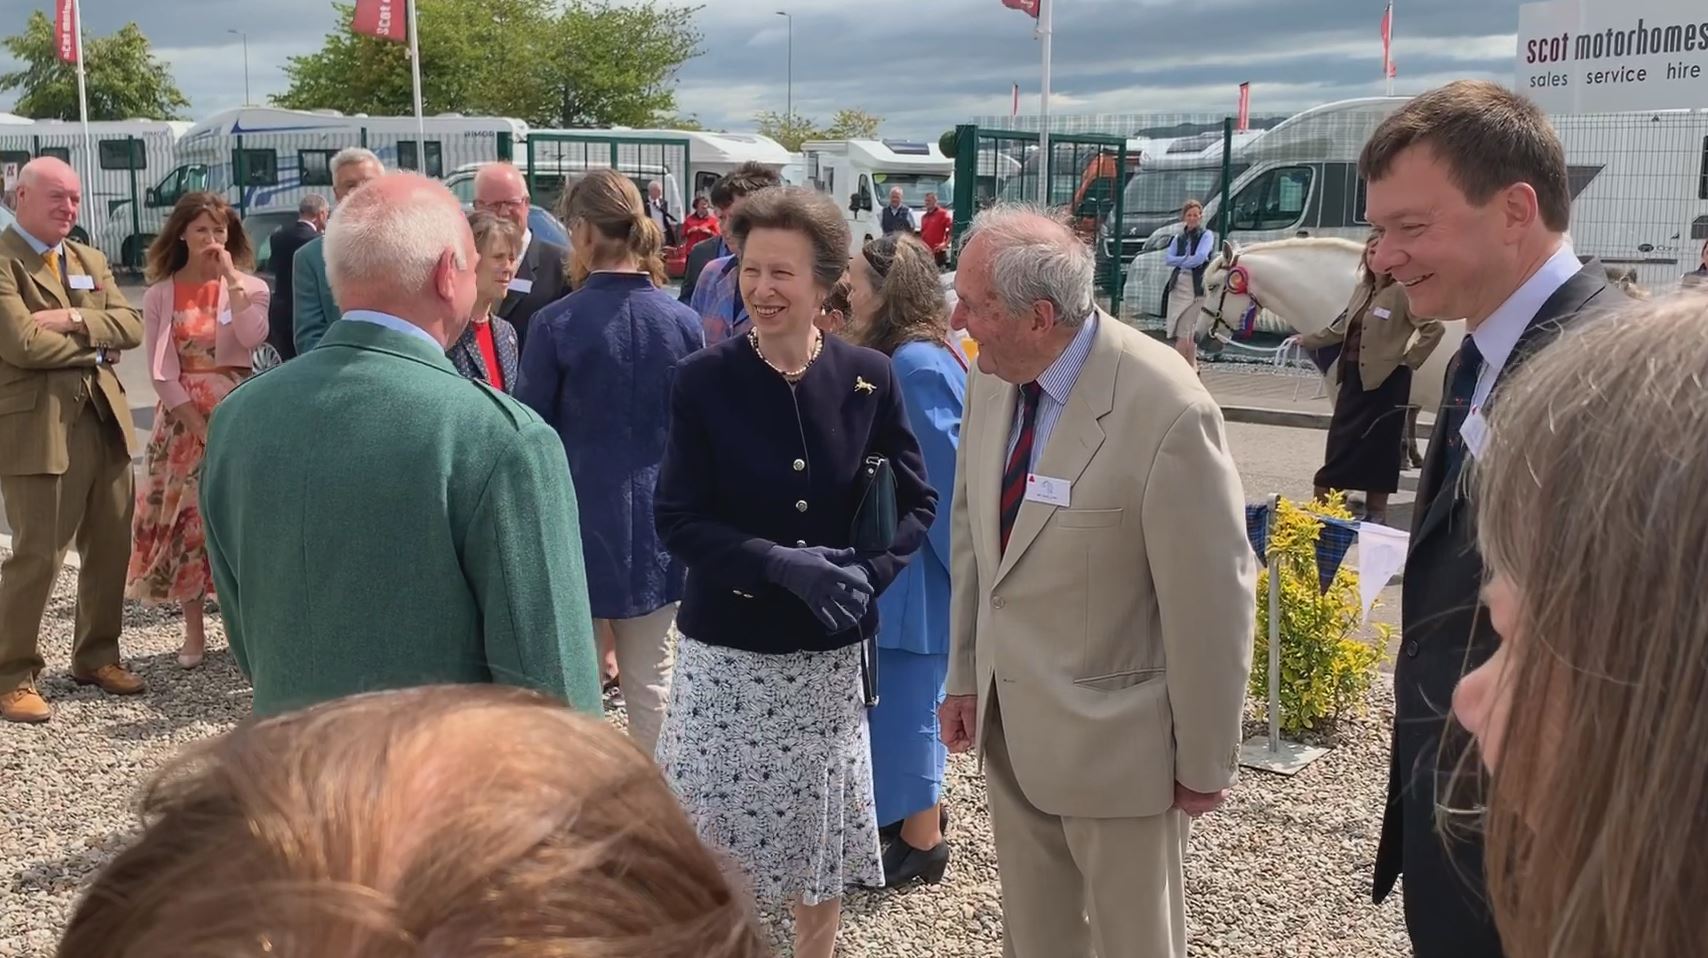 Princess Anne opening the new Highland Pony Society Headquarters at Aberuthven, Perthshire.